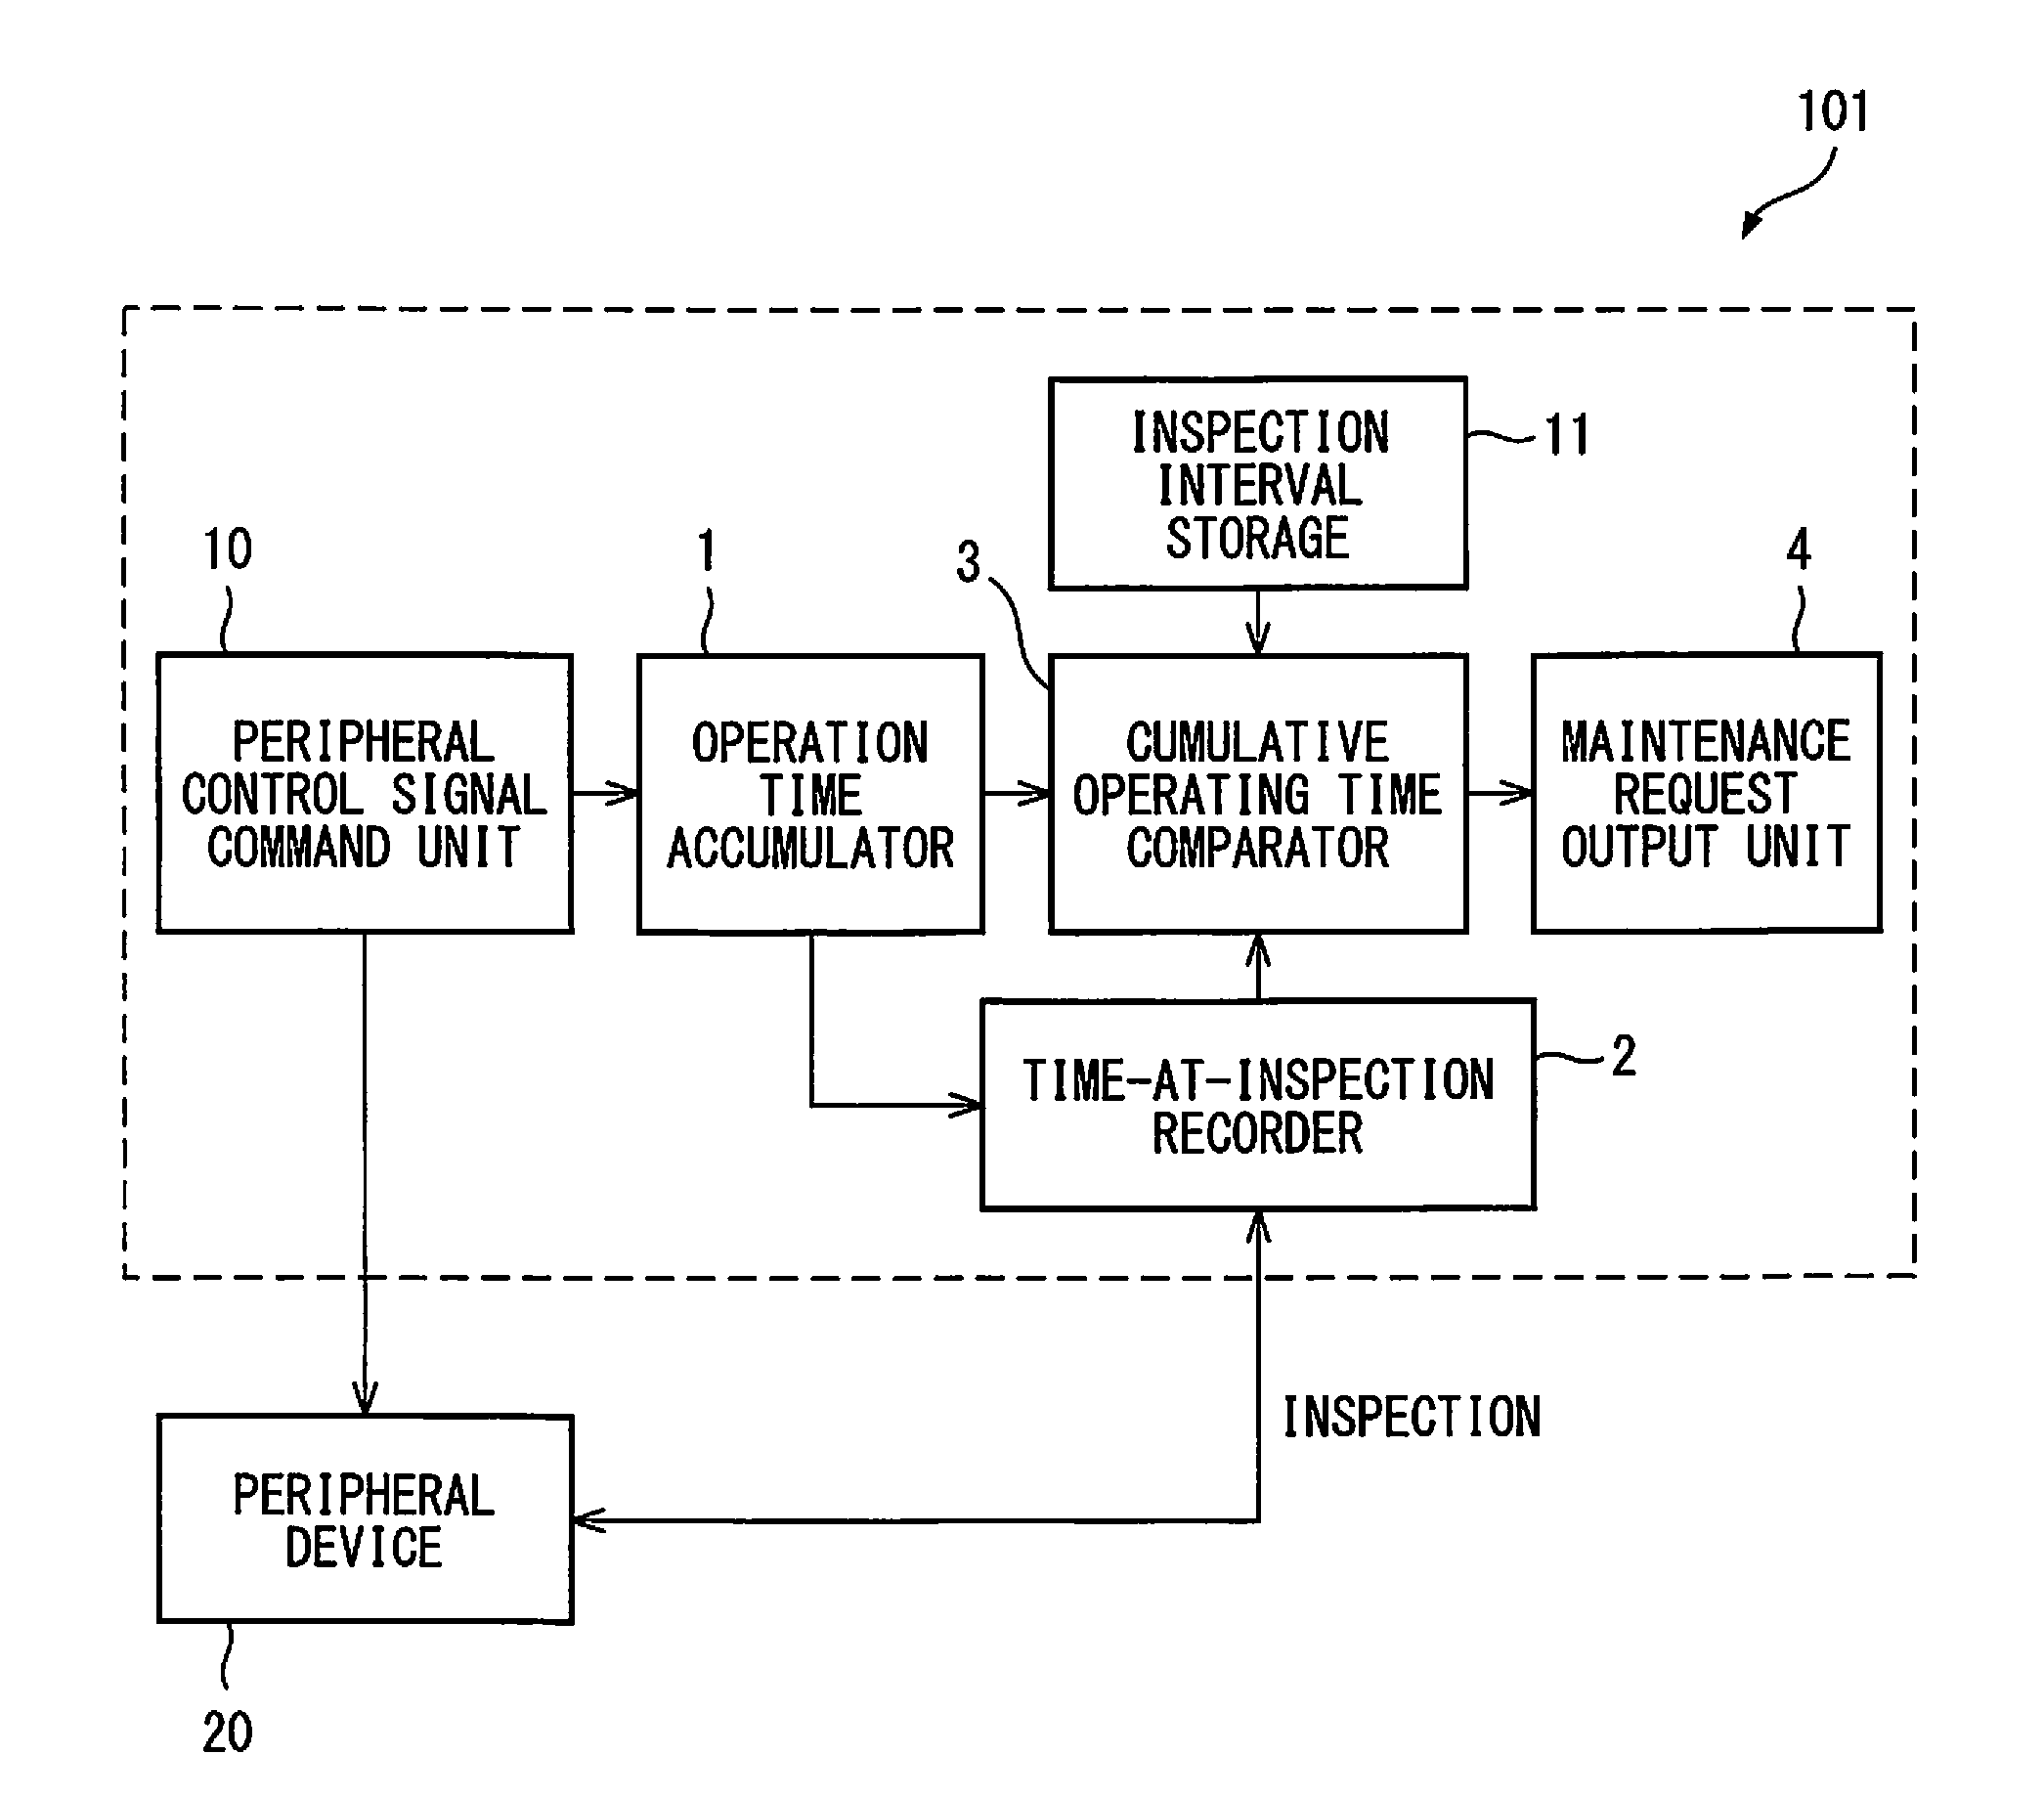 Control apparatus for giving notification of maintenance and inspection times of signal-controlled peripheral devices